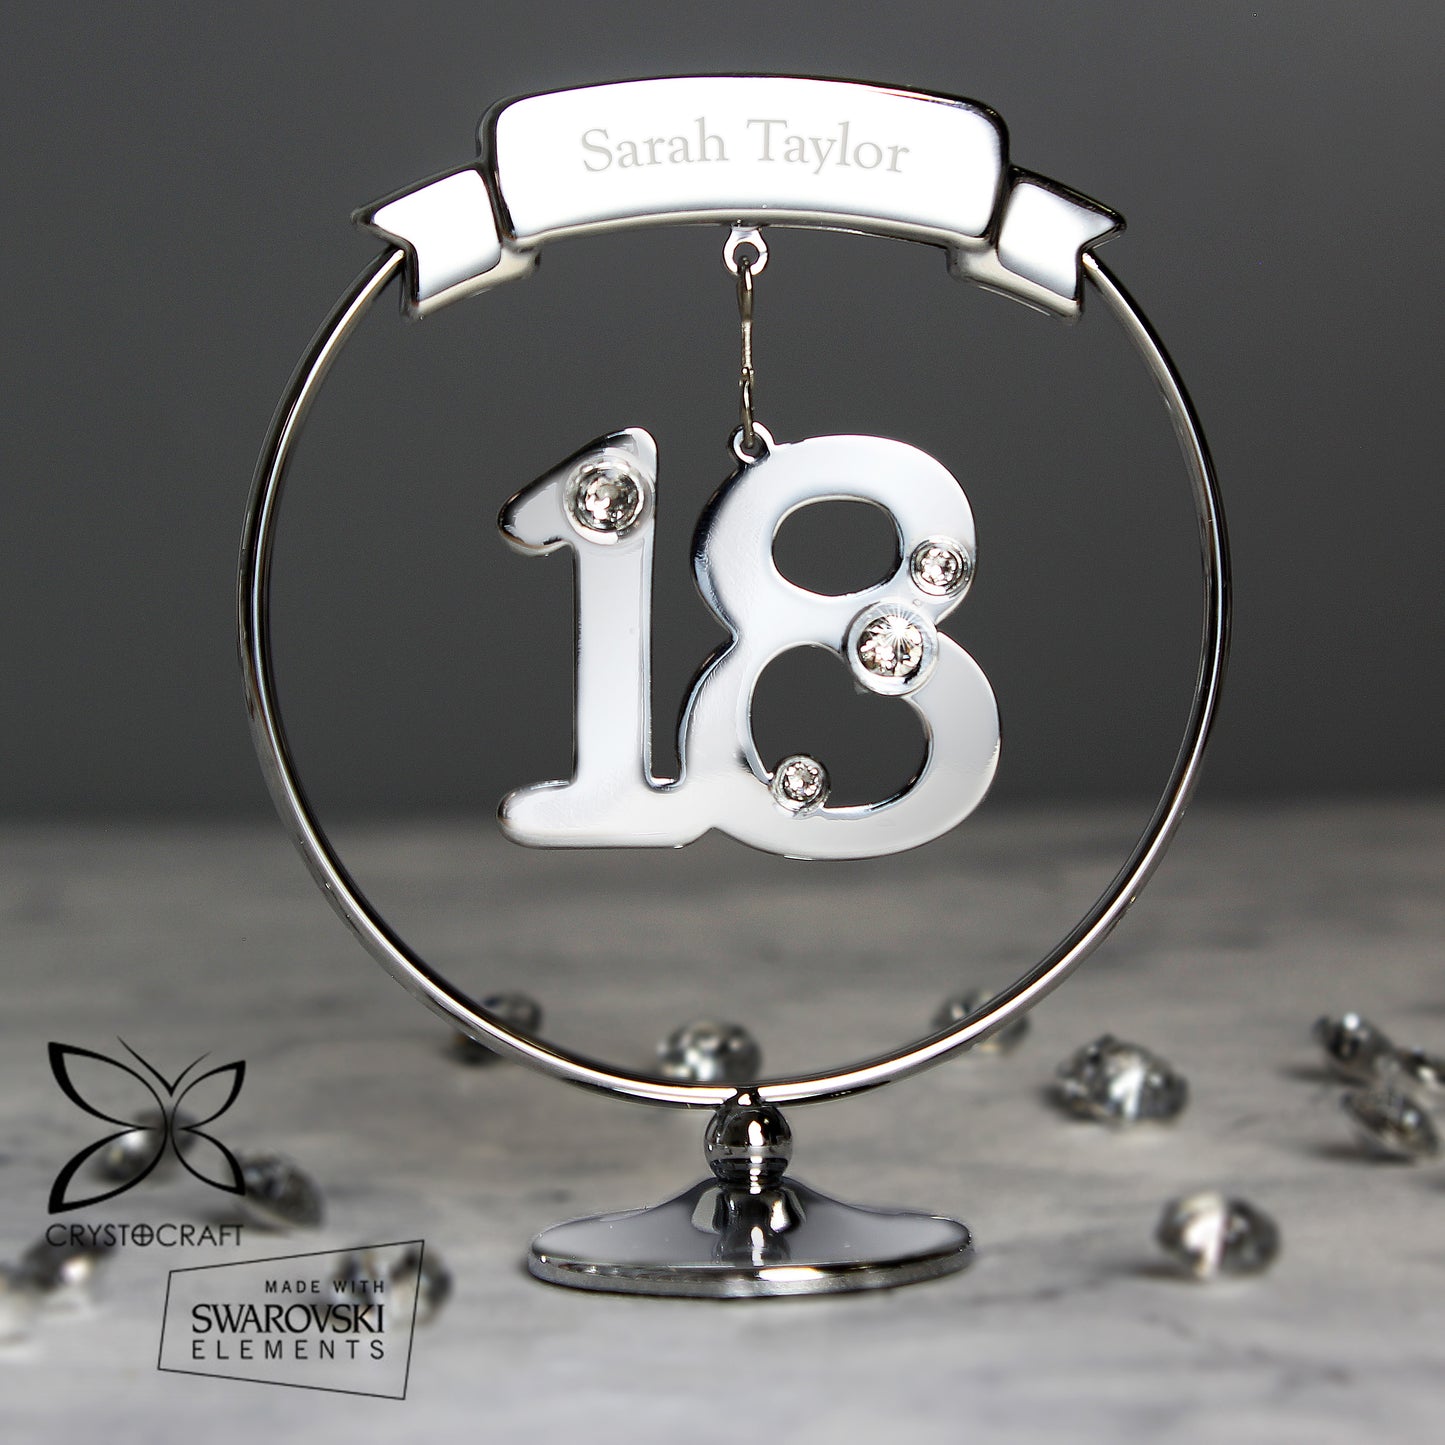 Personalised Name Crystocraft 18th Celebration Silver Ornament